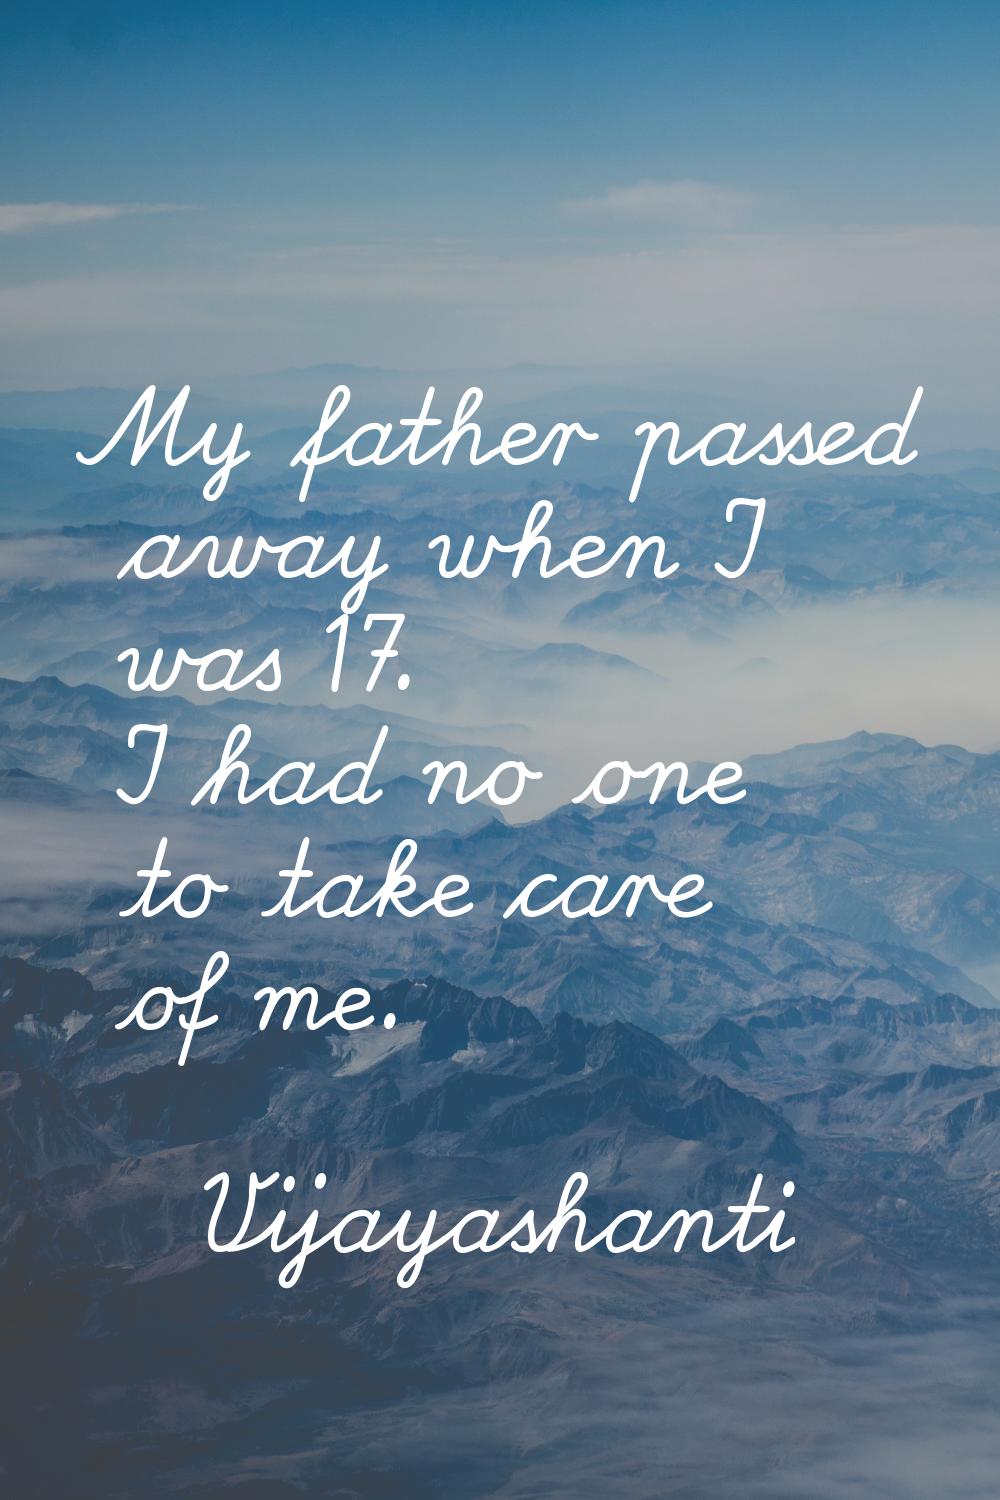 My father passed away when I was 17. I had no one to take care of me.